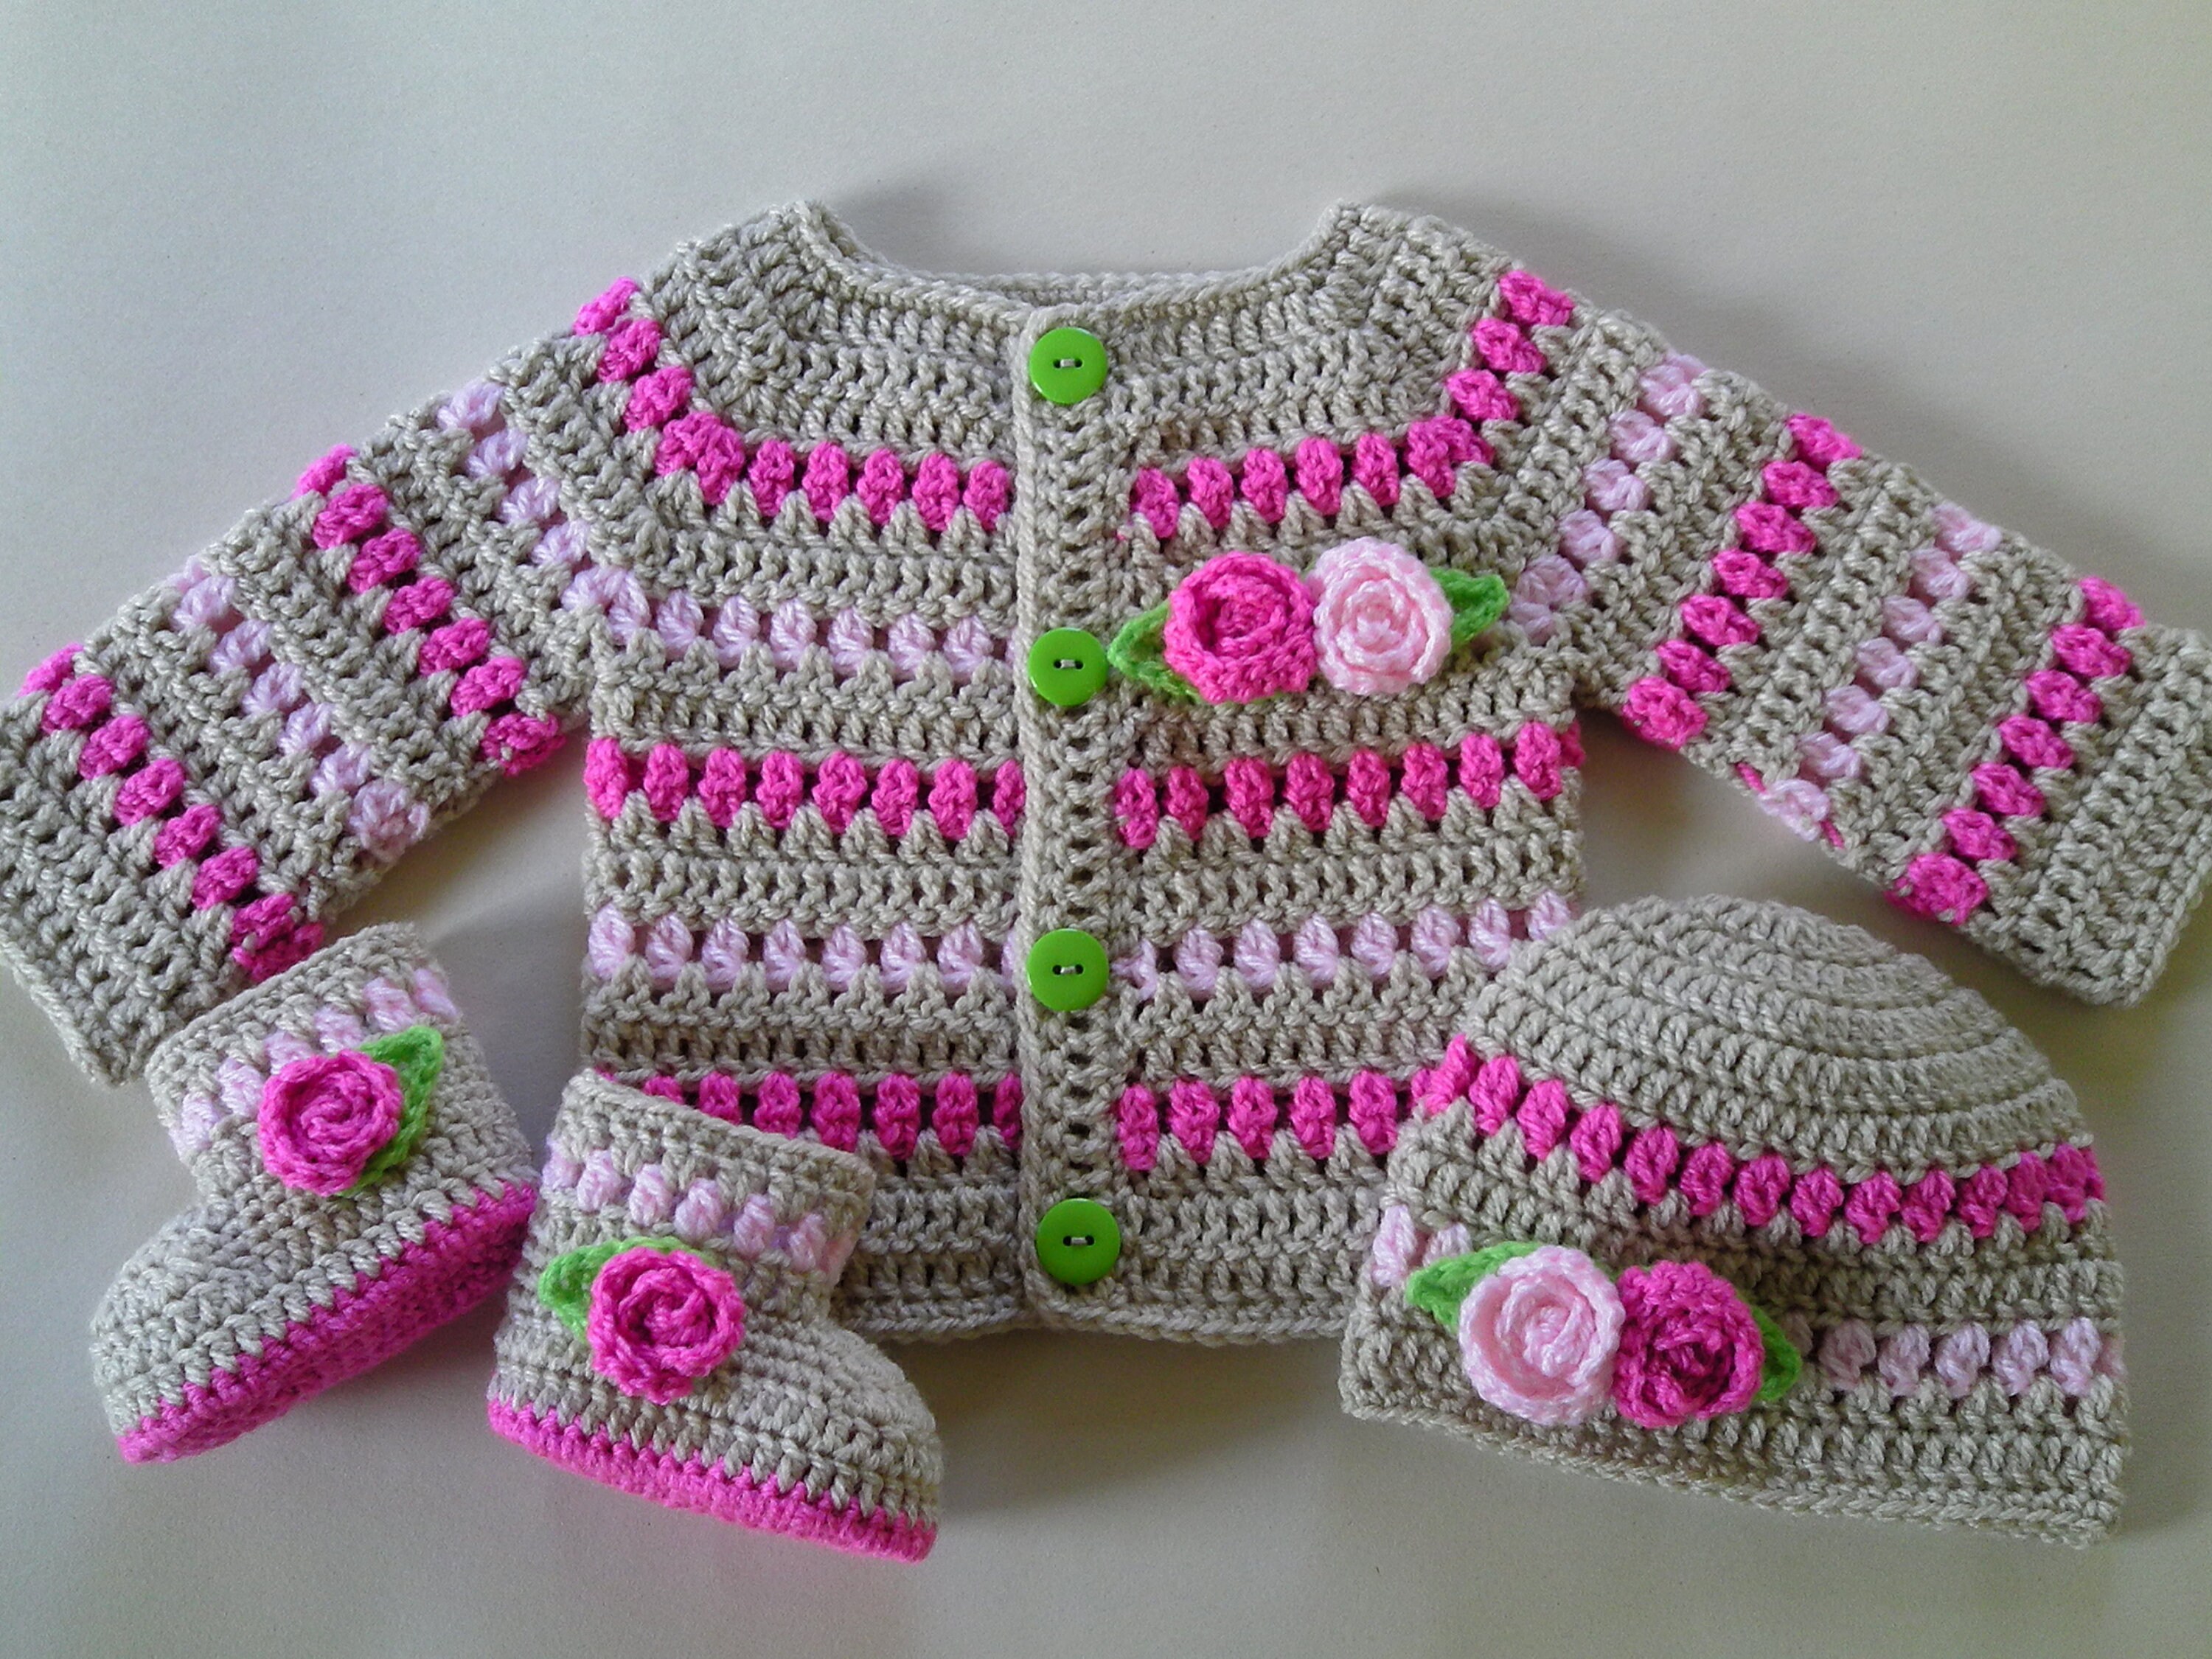 Crochet Baby sweater cardigan hat and booties set beige pink | Etsy